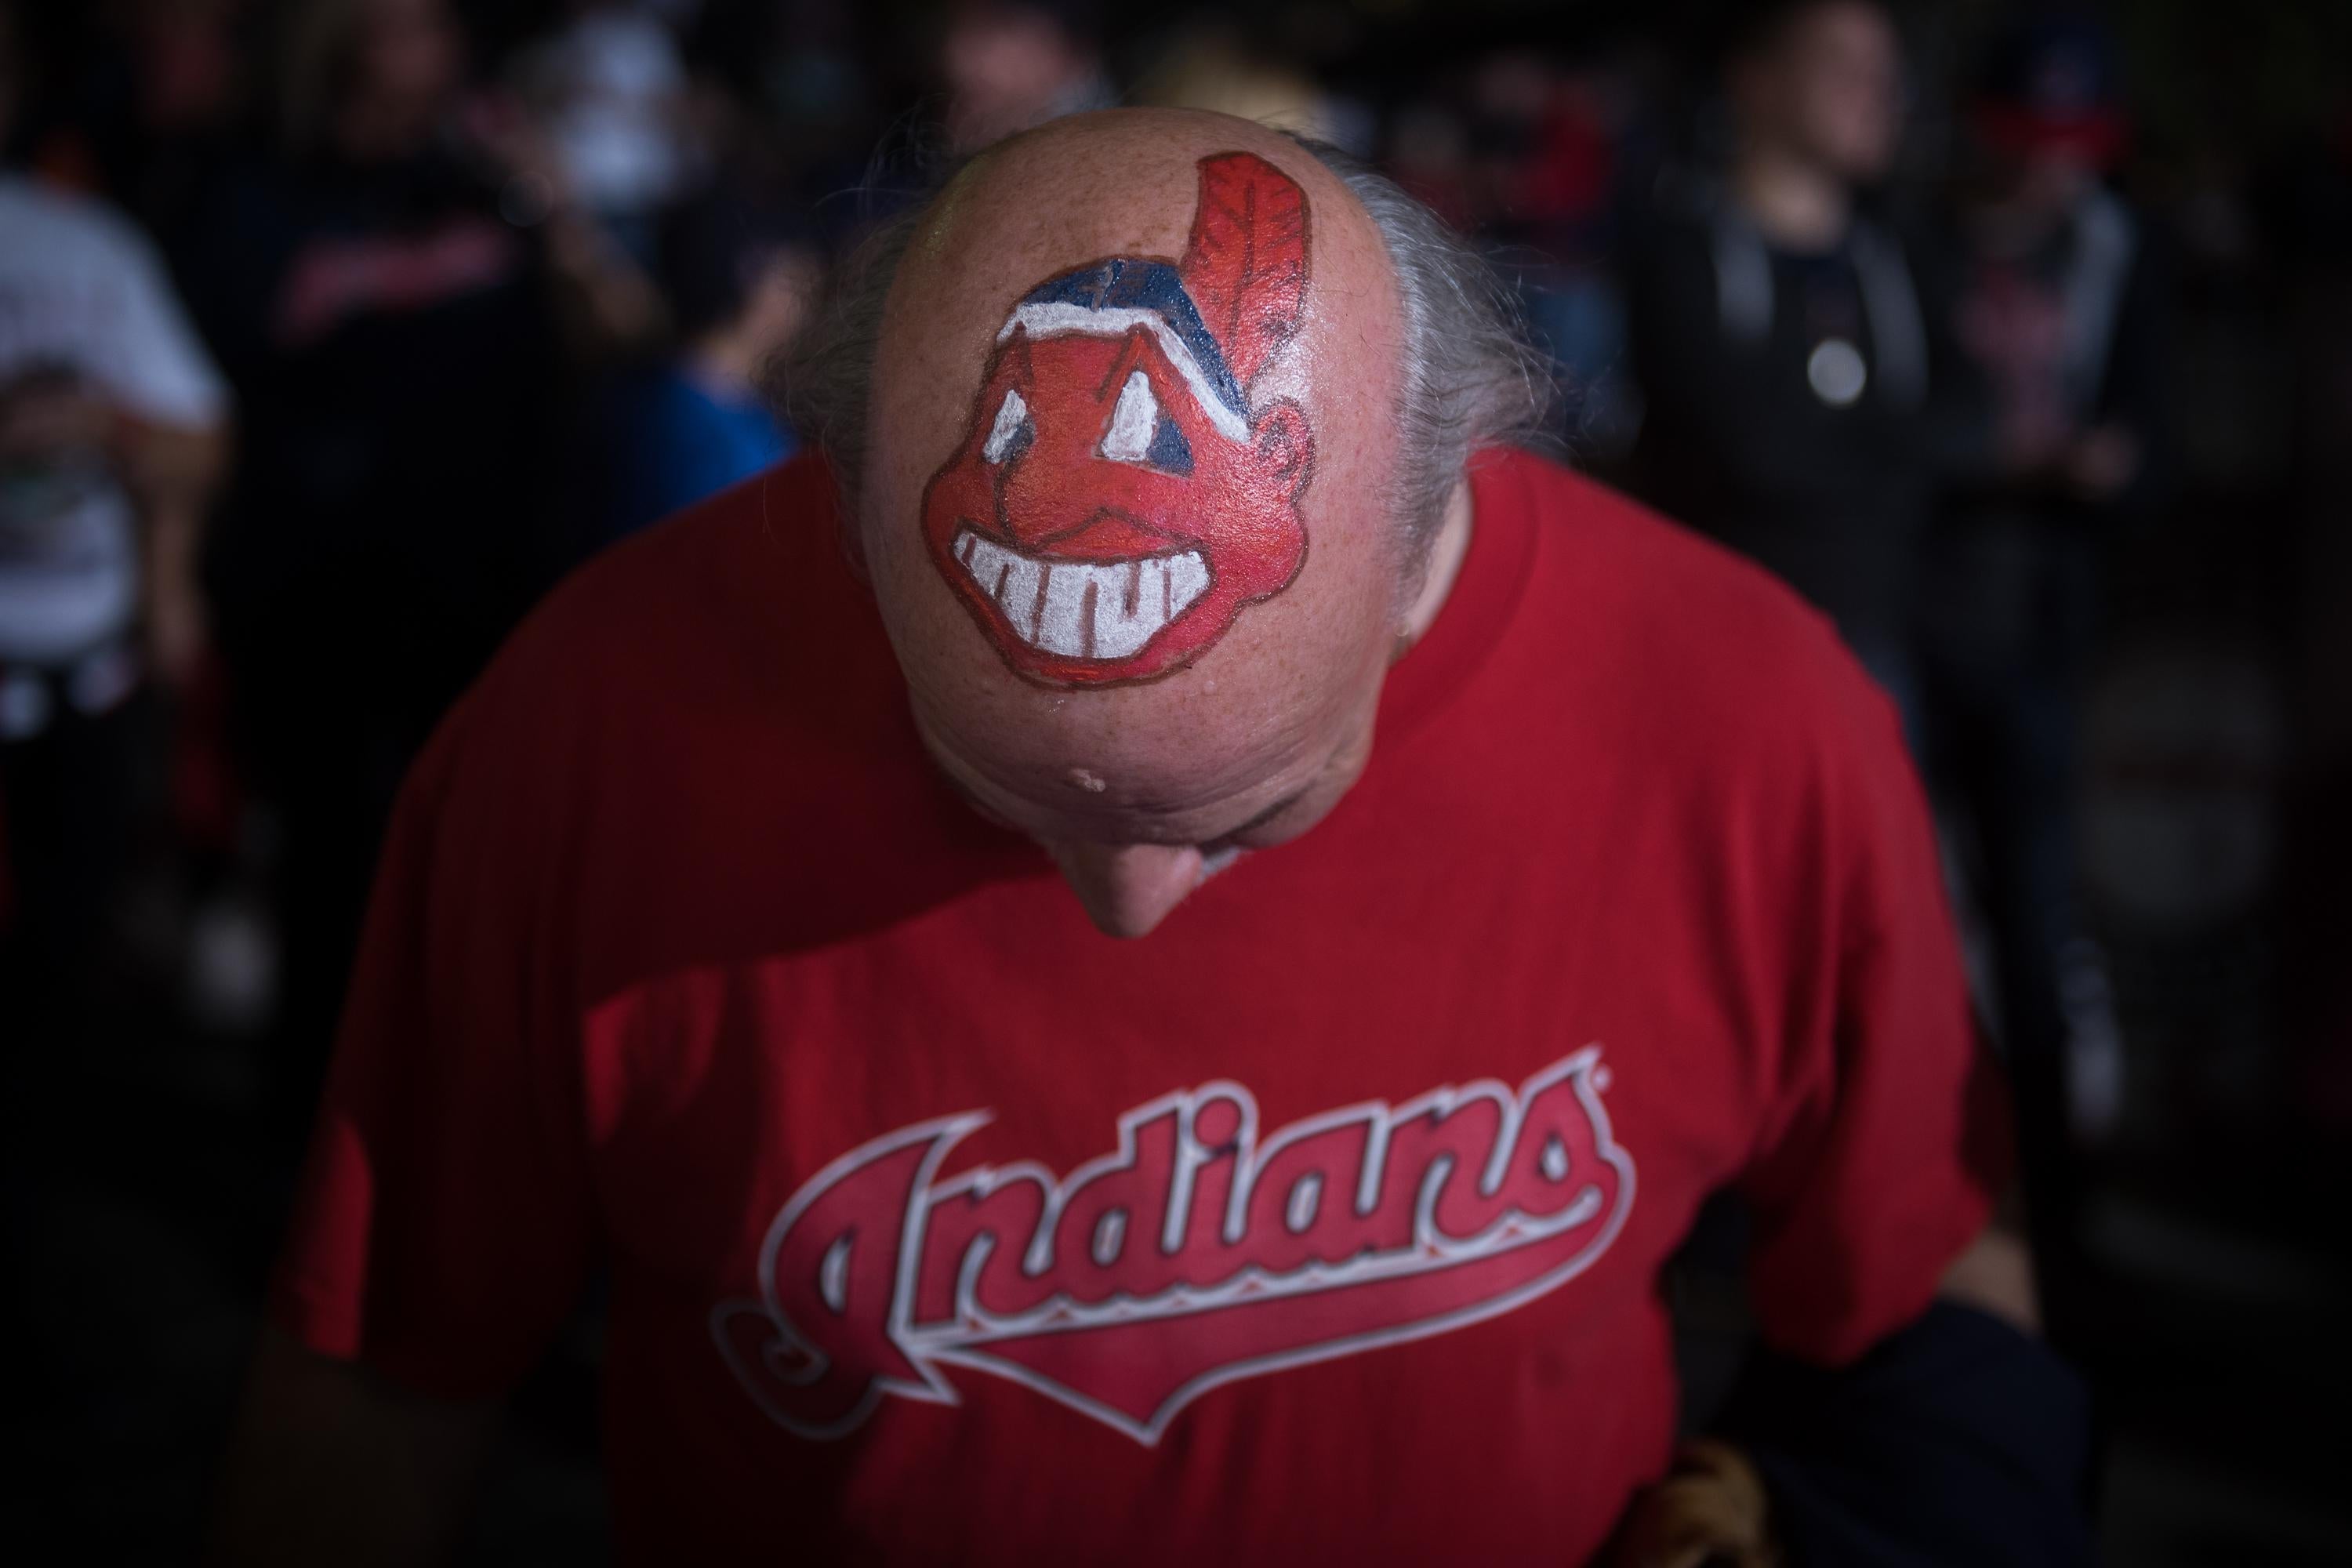 The Cleveland Indians will change its team name.